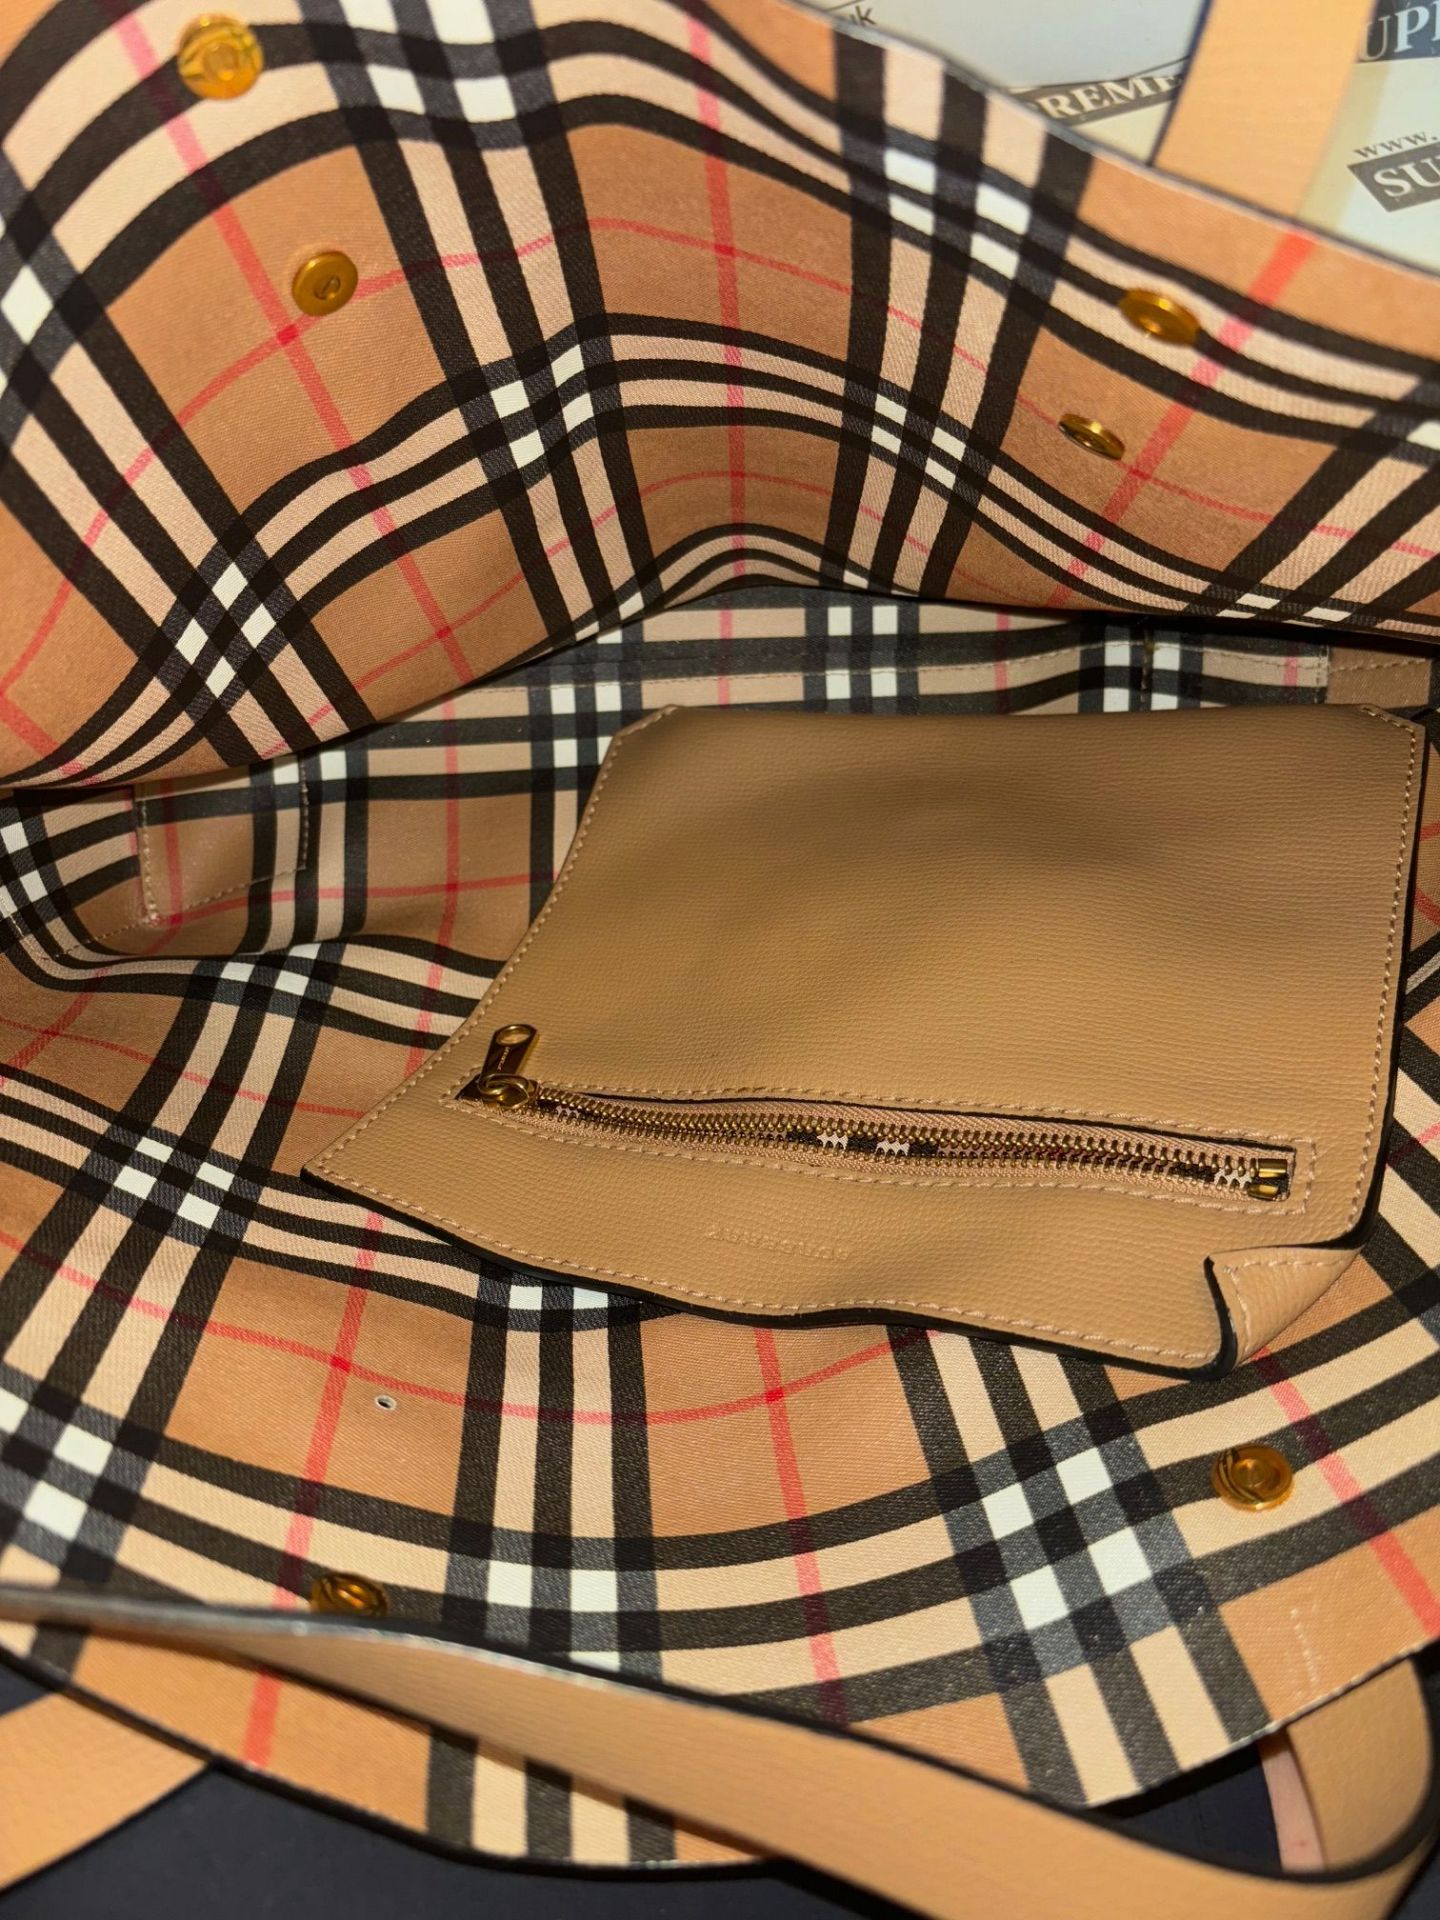 Genuine Burberry Beige Tote Heymarket. RRP £1,692. This shopper tote from Burberry is a timeless - Image 9 of 9